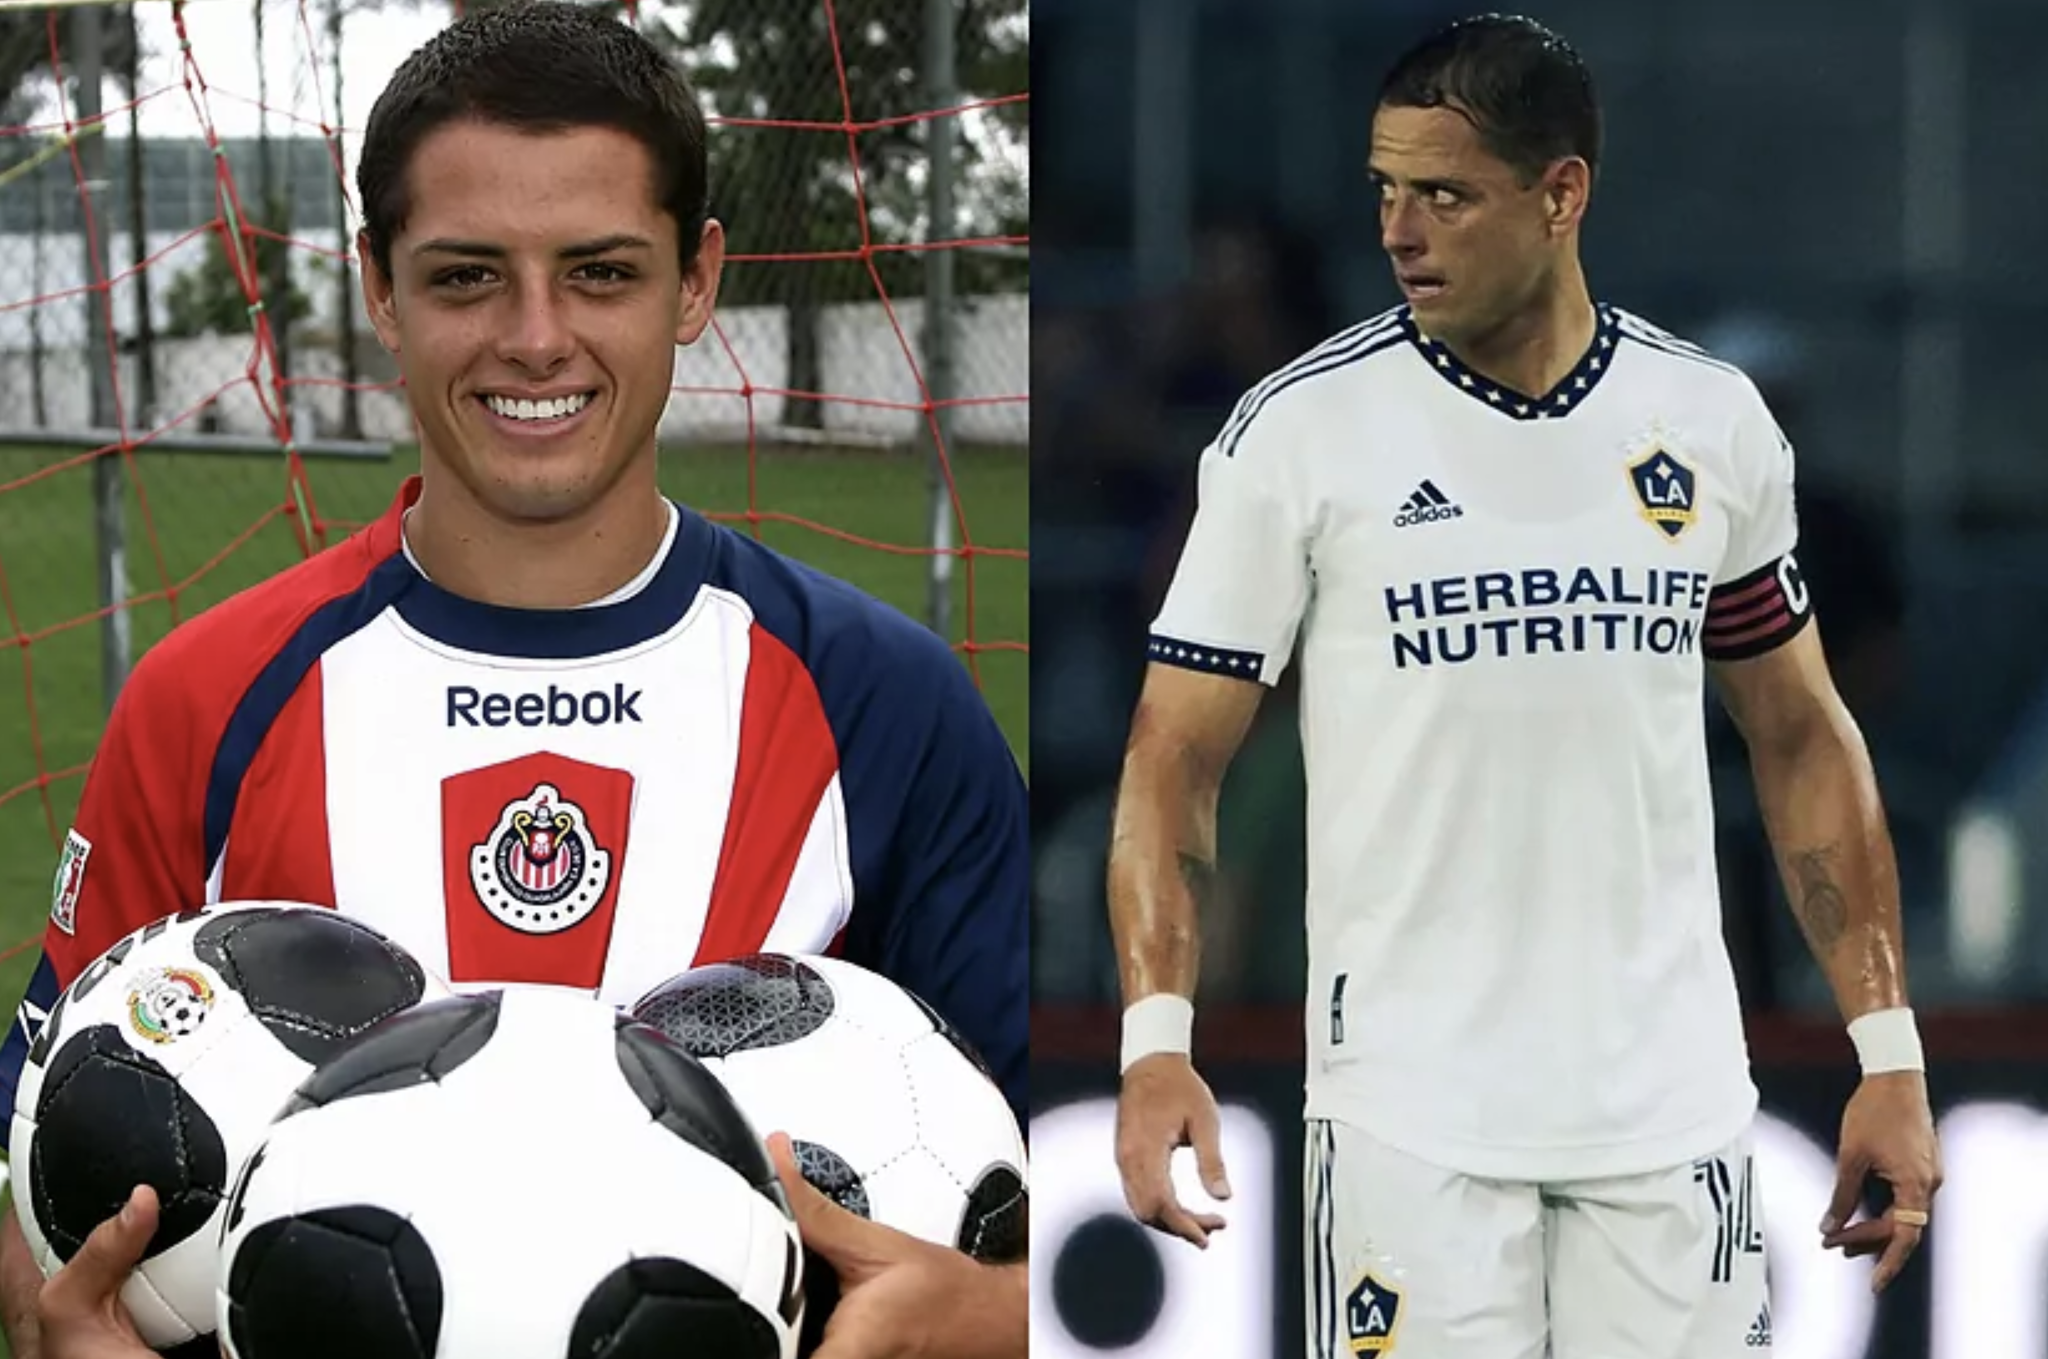 Chicharito leaves LA Galaxy: Which club will he play for next?